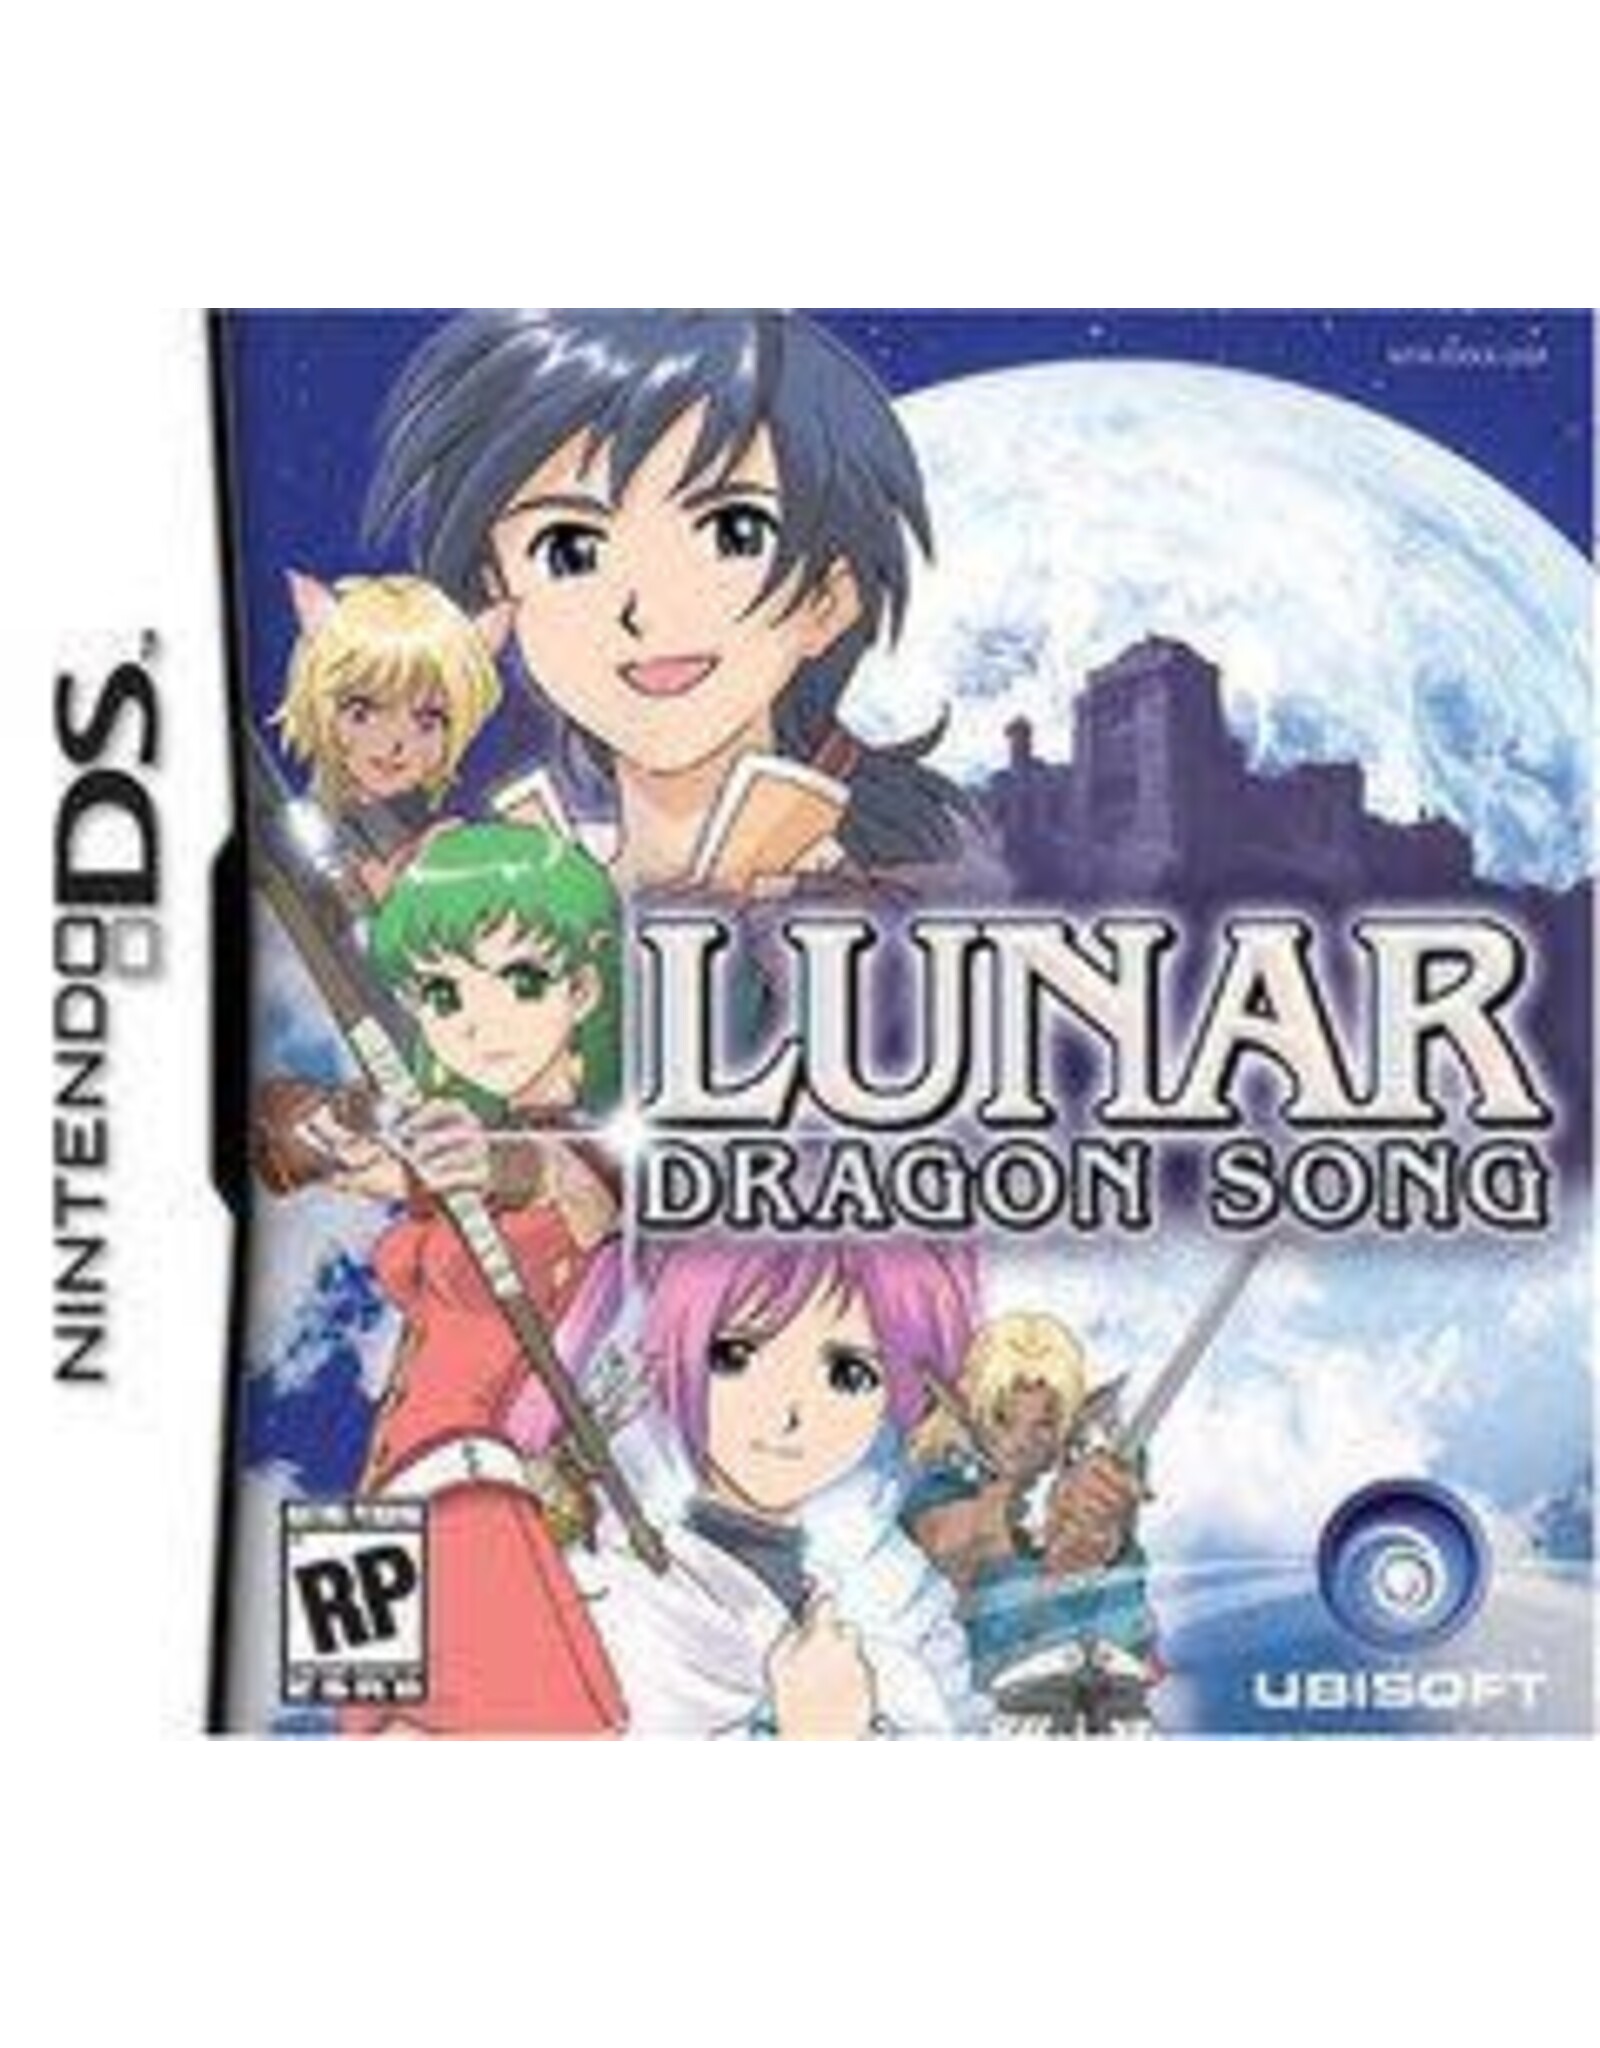 Nintendo DS Lunar Dragon Song (Used, Cart Only, Cosmetic Damage)